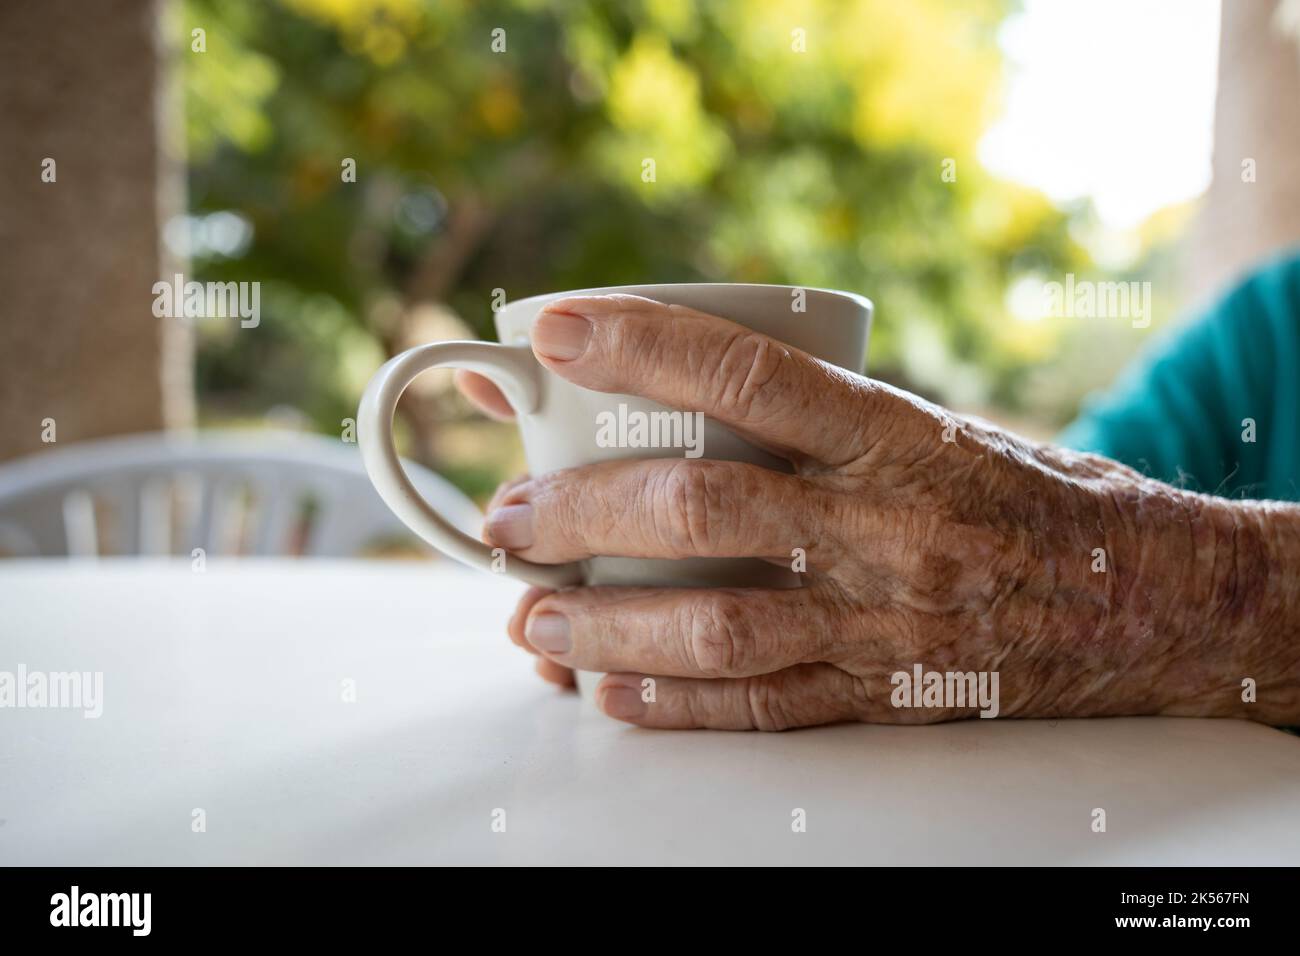 elderly woman hands holding a cup Stock Photo